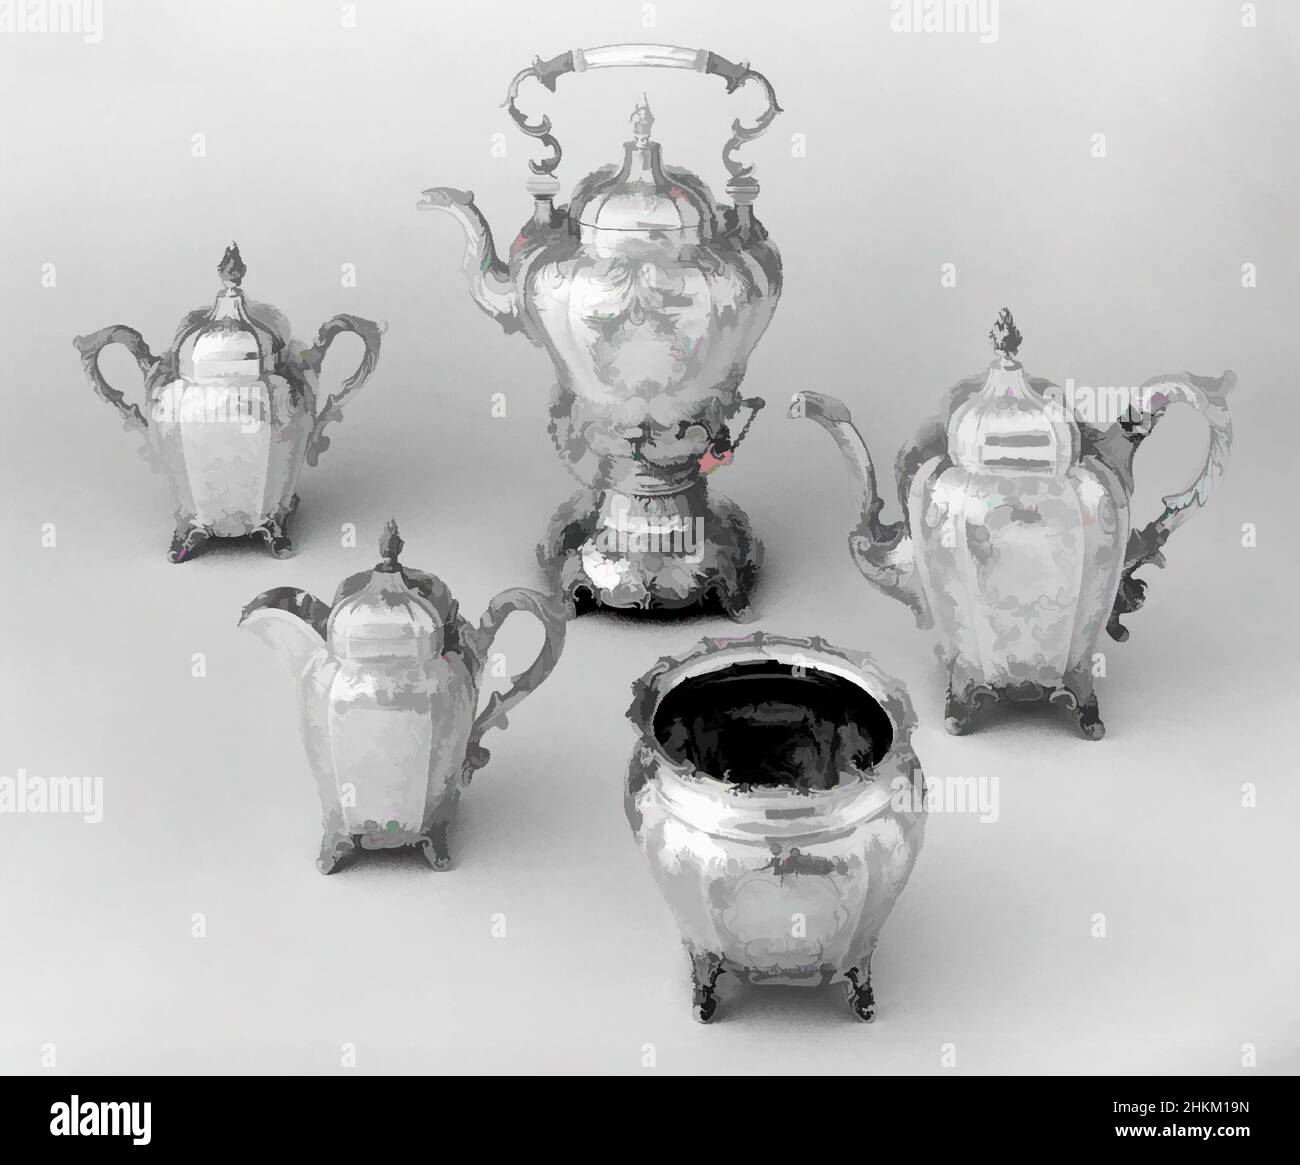 https://c8.alamy.com/comp/2HKM19N/art-inspired-by-five-piece-tea-service-william-gale-american-1799-1867-nathaniel-hayden-american-active-1845-1850-1847-silver-and-ivory-made-in-new-york-new-york-united-states-north-and-central-america-charleston-south-carolina-united-states-north-and-central-america-classic-works-modernized-by-artotop-with-a-splash-of-modernity-shapes-color-and-value-eye-catching-visual-impact-on-art-emotions-through-freedom-of-artworks-in-a-contemporary-way-a-timeless-message-pursuing-a-wildly-creative-new-direction-artists-turning-to-the-digital-medium-and-creating-the-artotop-nft-2HKM19N.jpg